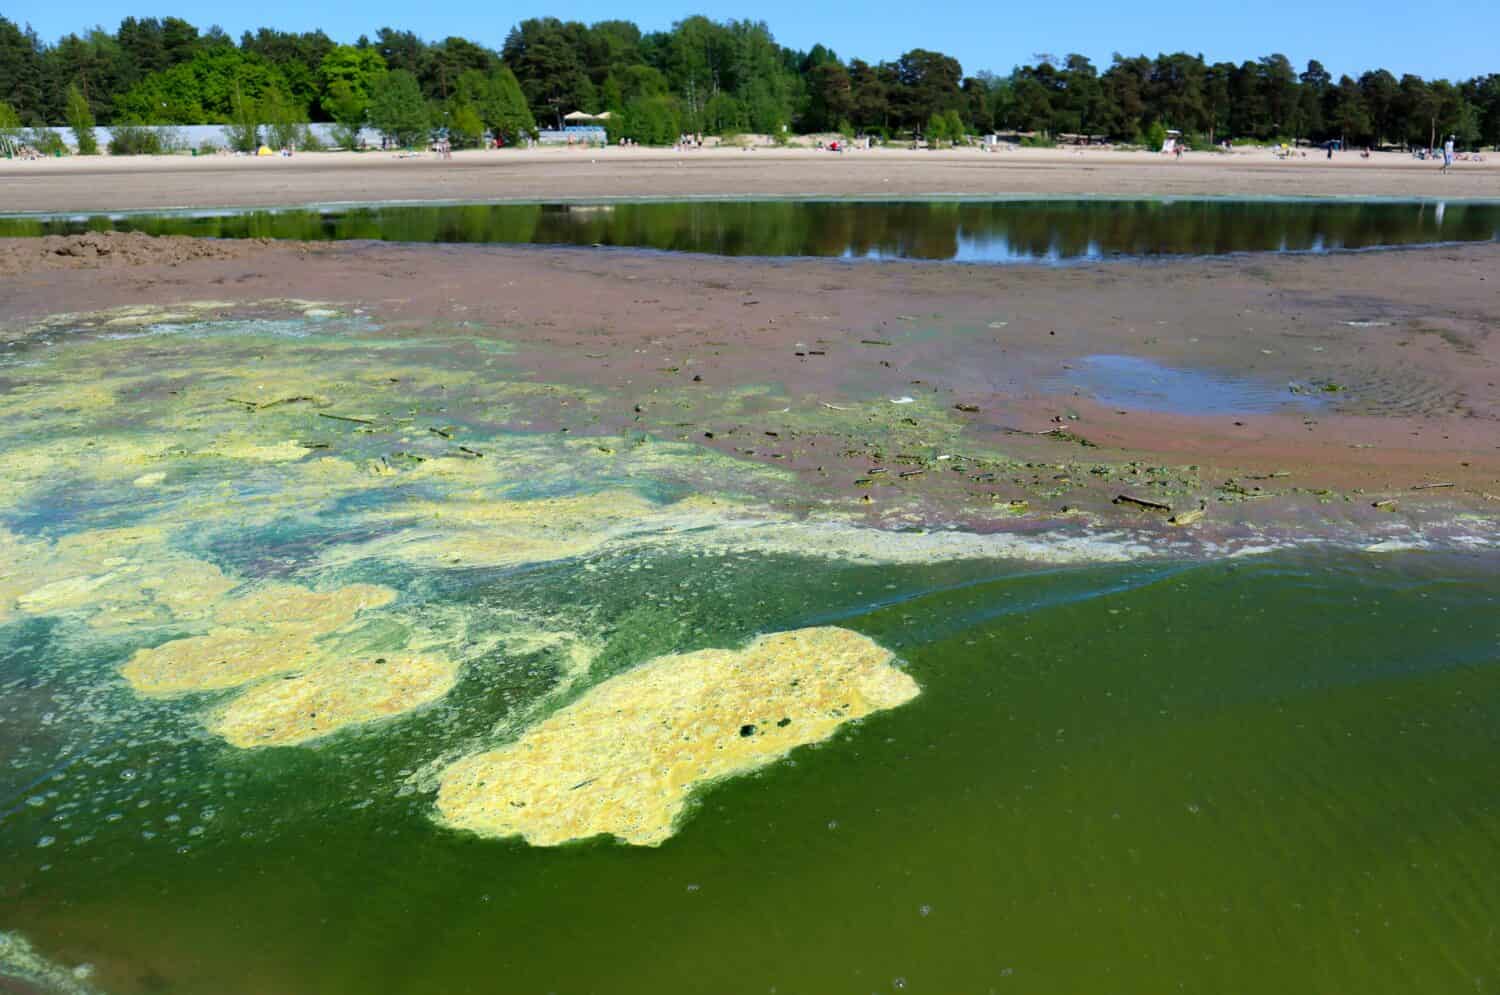 Sandy coast and water on the beach are polluted with blue-green algae (cyanobacteria). This is a global environmental problem of nature pollution. Baltic sea in summer.